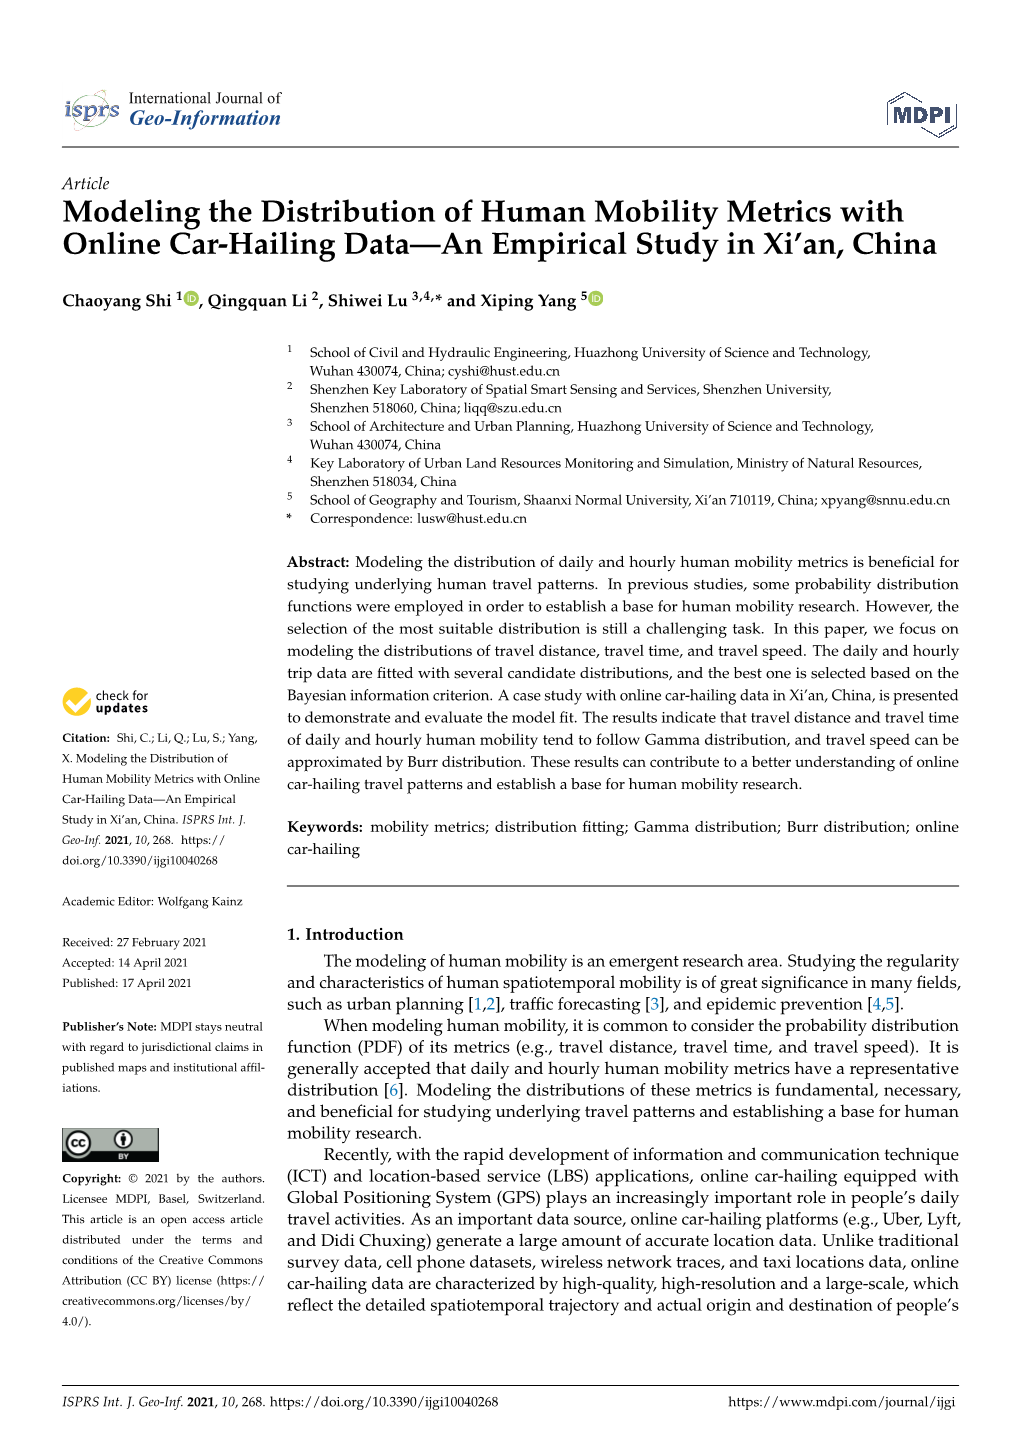 Modeling the Distribution of Human Mobility Metrics with Online Car-Hailing Data—An Empirical Study in Xi’An, China